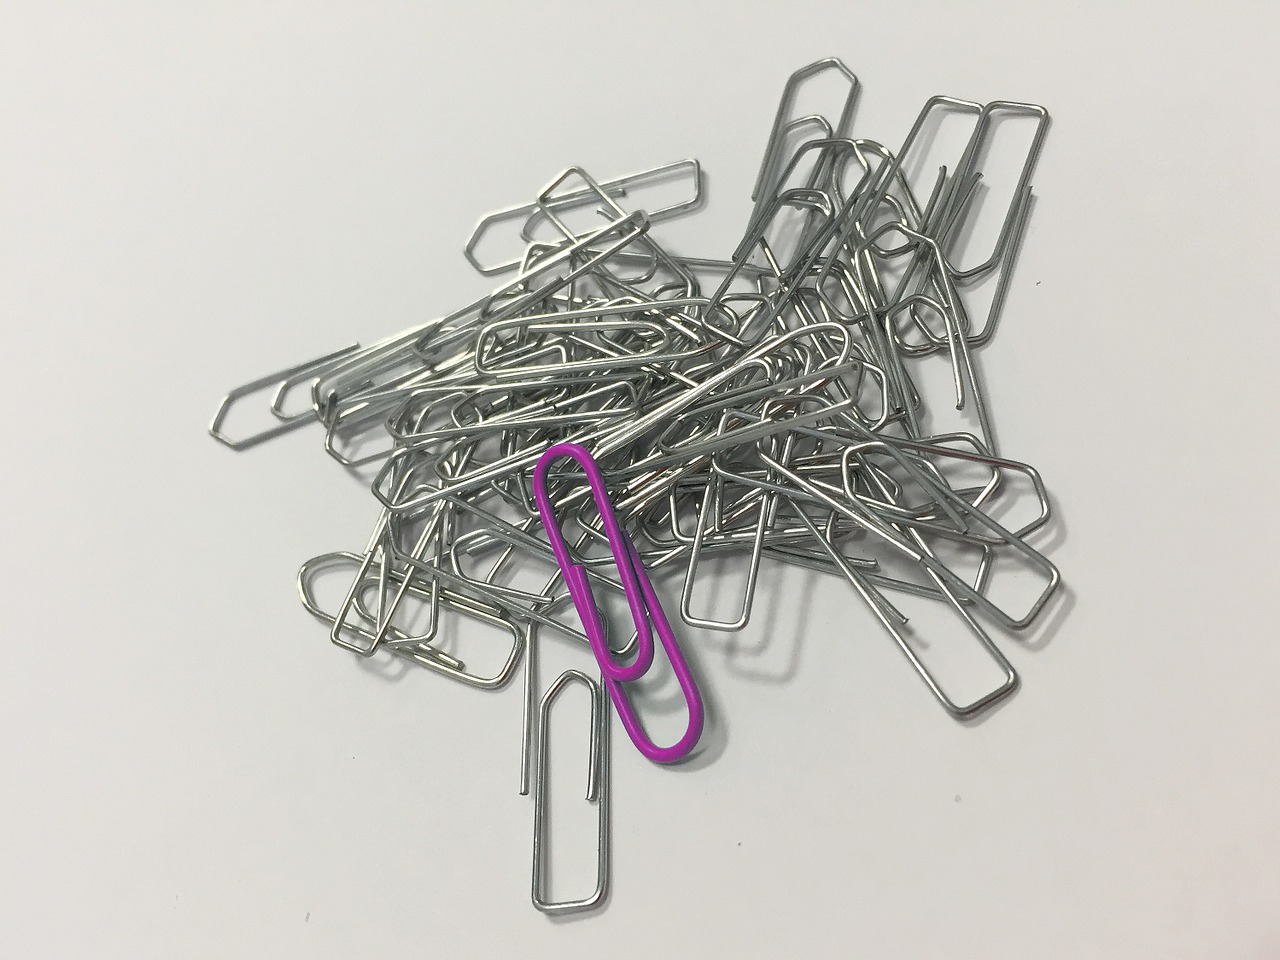 paperclip clip office free photo